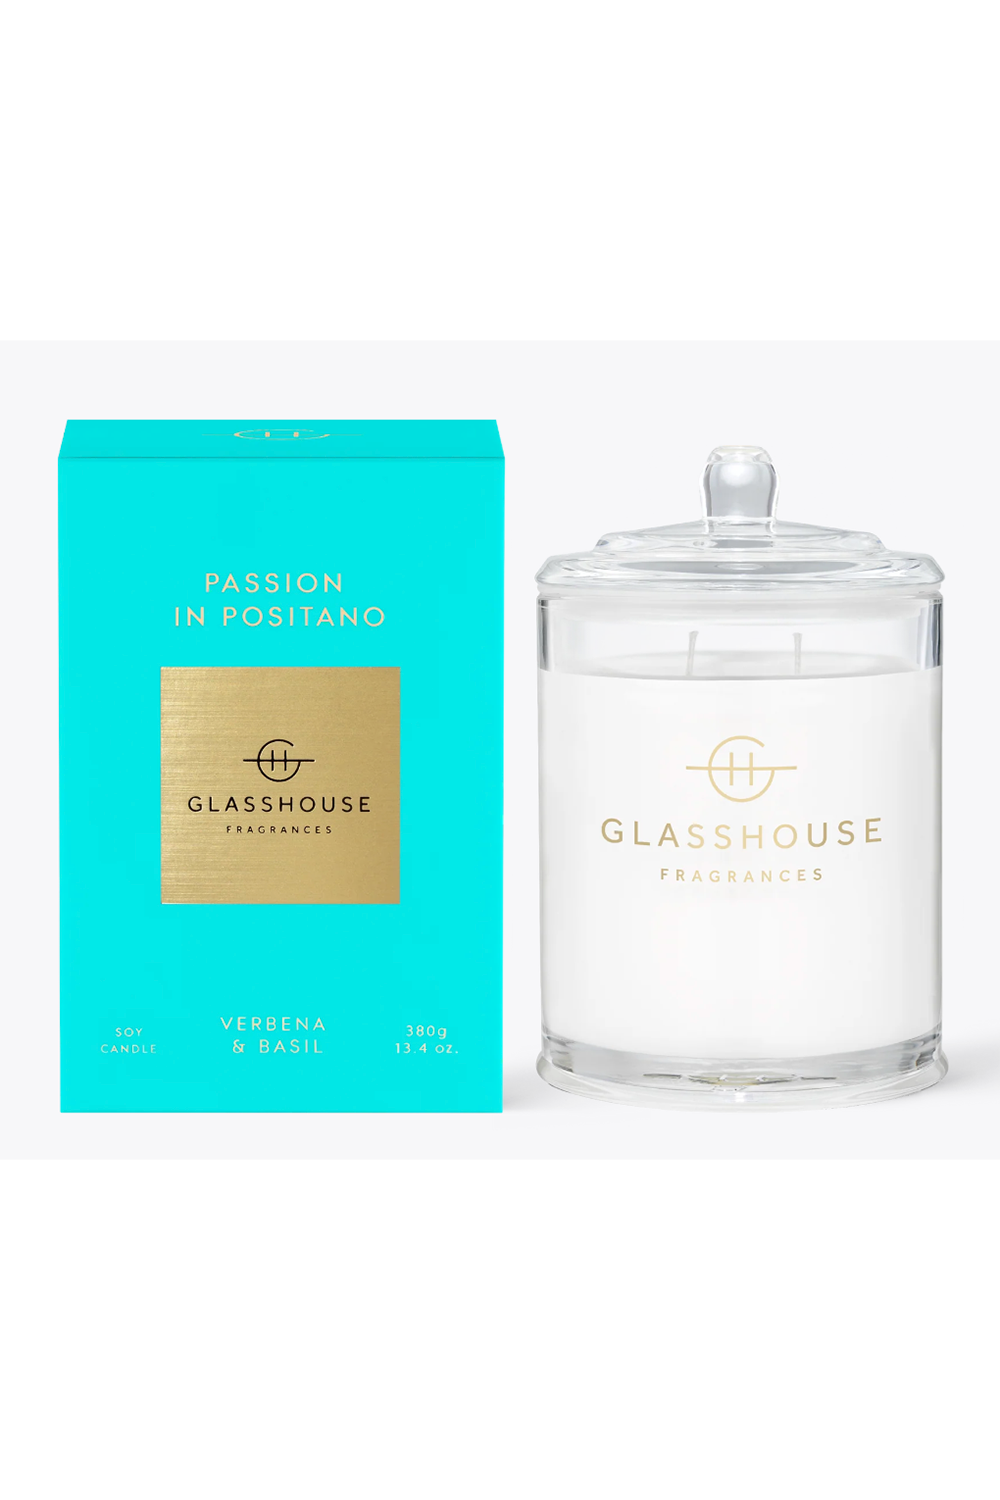 Glasshouse Fragrance Candle - Passion in Positano